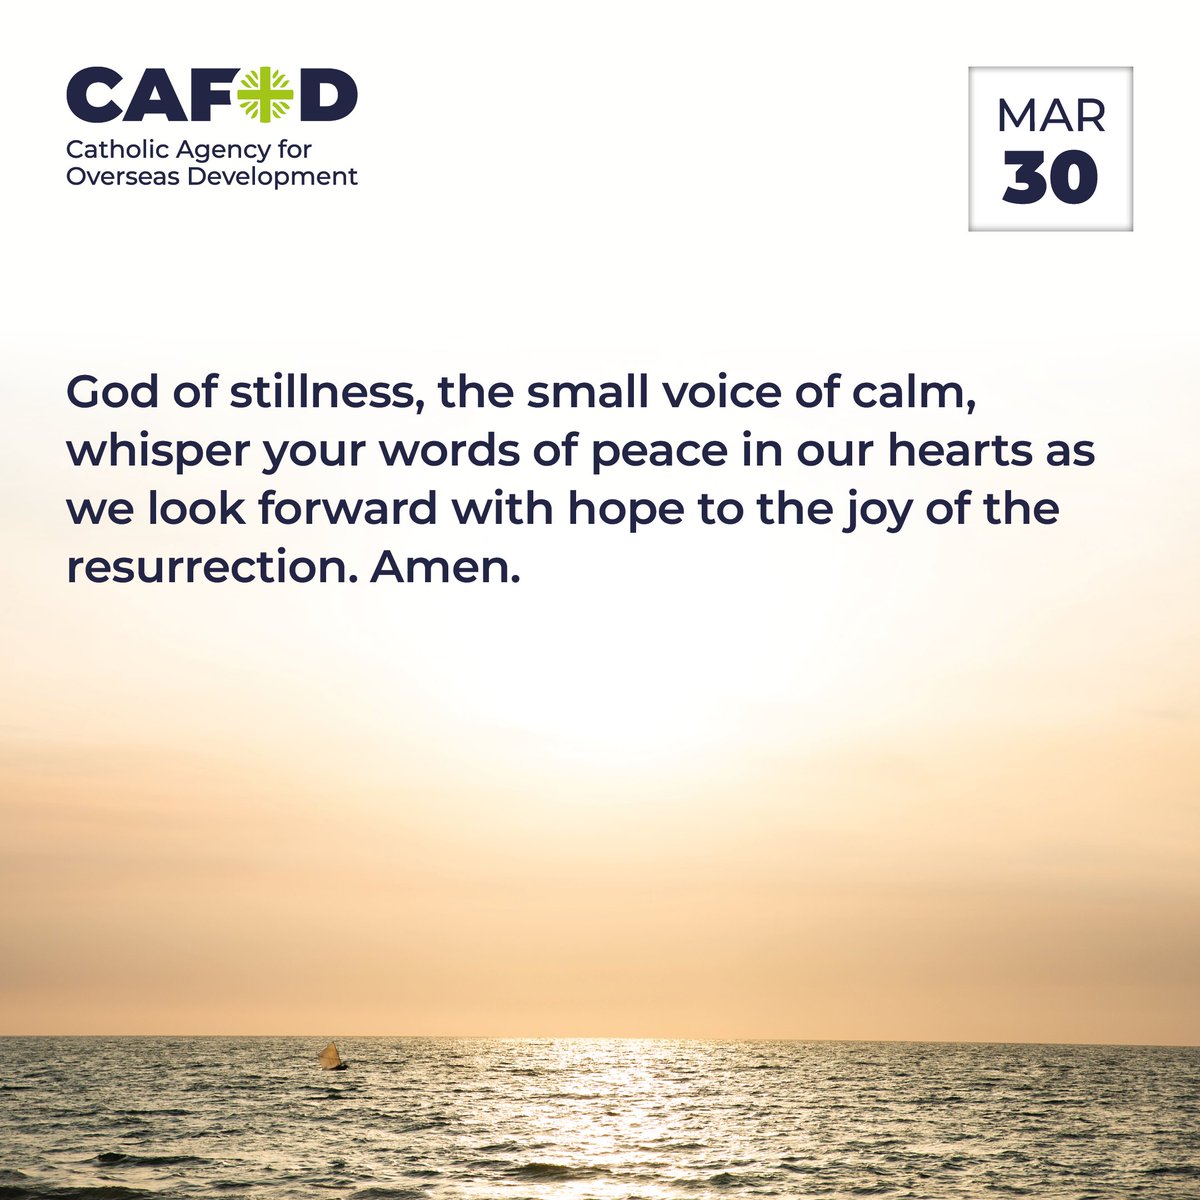 Today is a day of silence and calm contemplation. As we look back on our Lenten journey today, and wait for the joy of the resurrection, we can consider the stories we've heard and pray they continue to impact our lives. cafod.org.uk/pray/lent-cale…